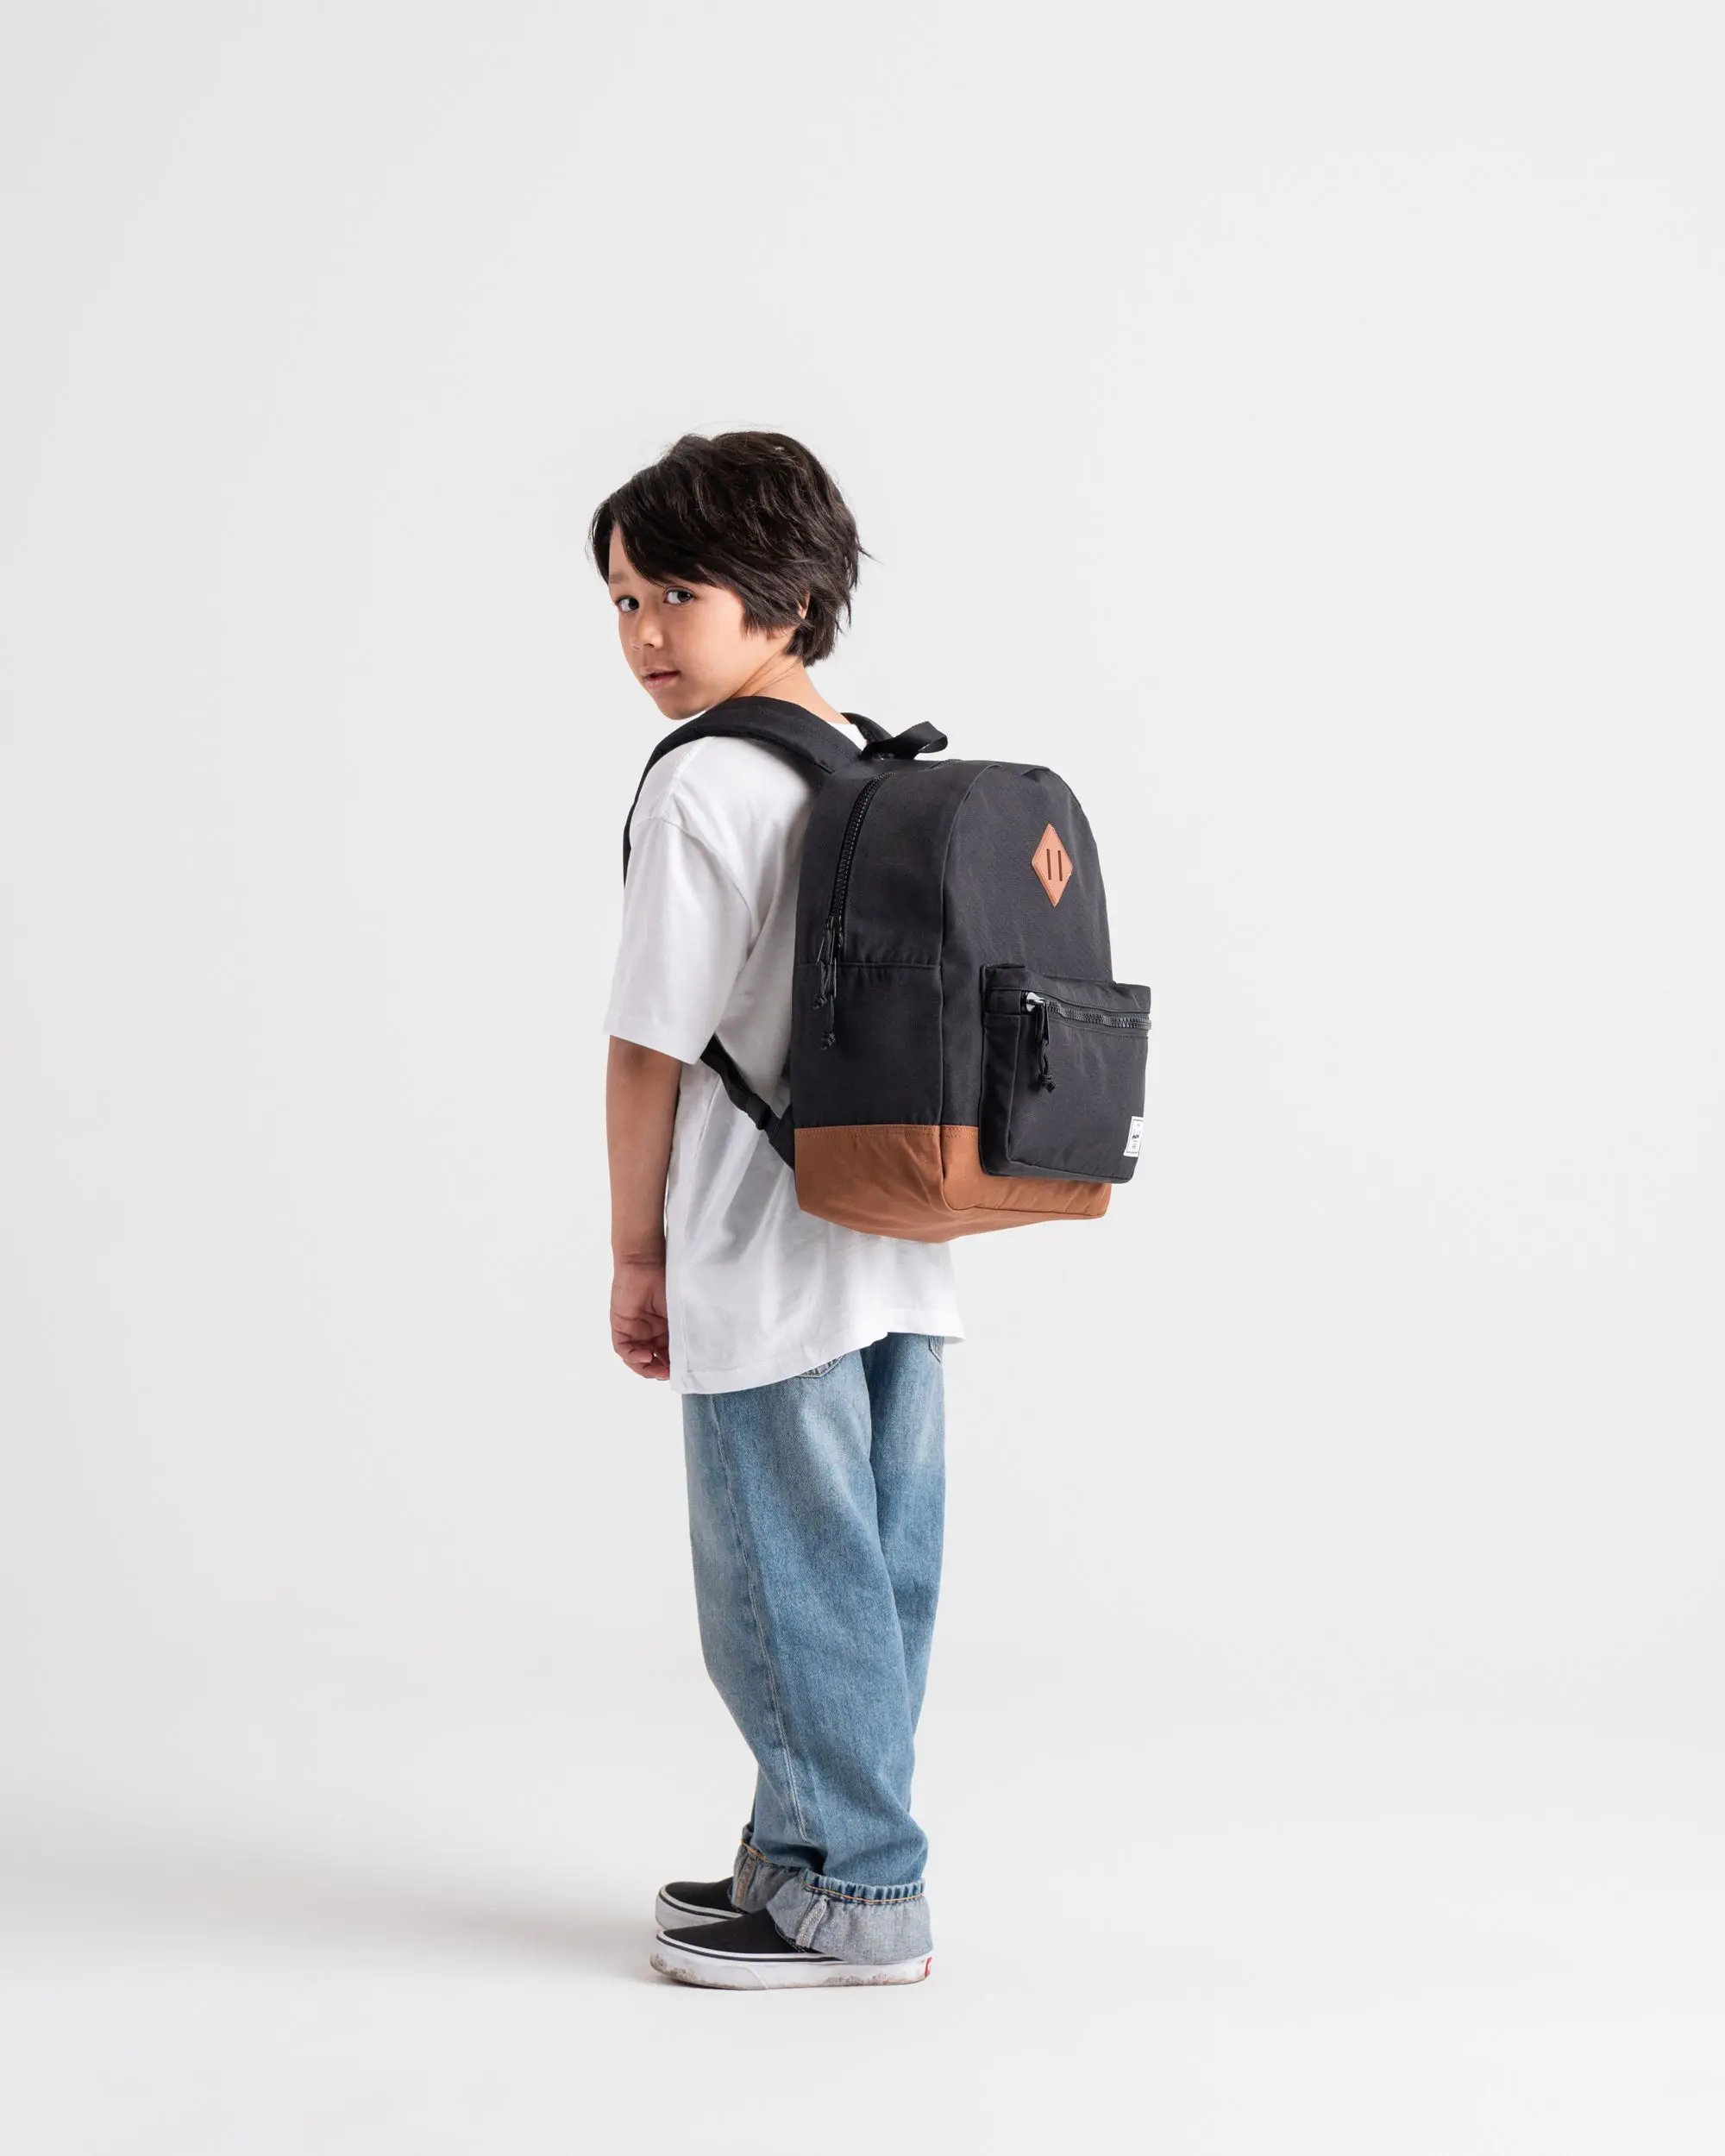 Heritage Backpack Youth 26L | Herschel Supply Co.